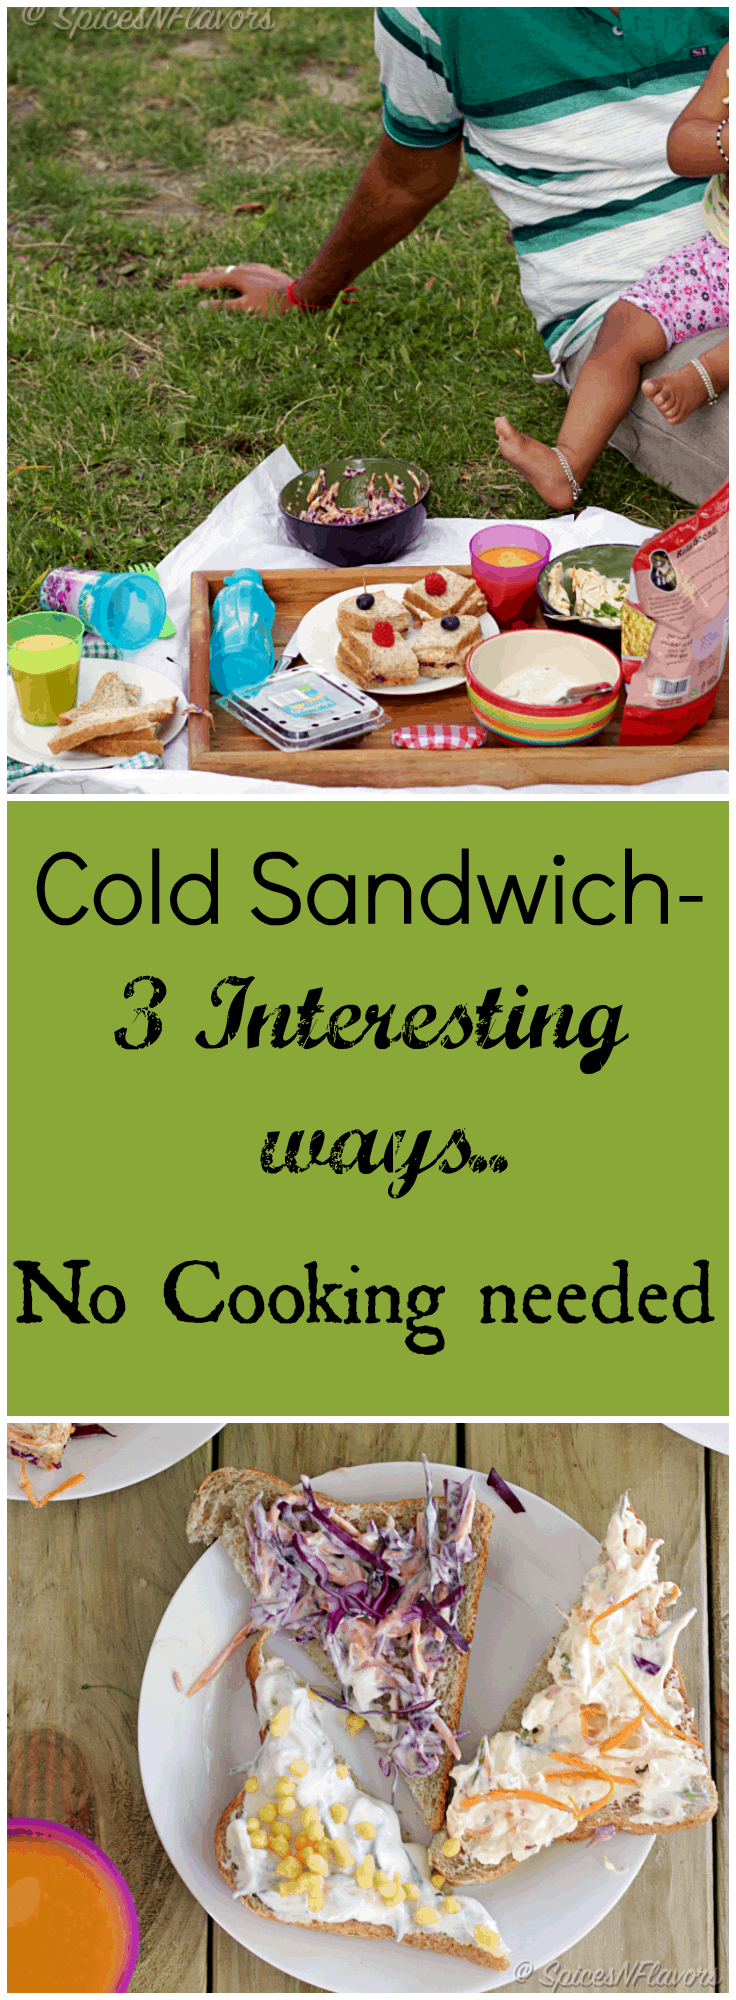 cold-sandwich-3-interesting-ideas with 3 different and delicious filling ideas perfect for back to school